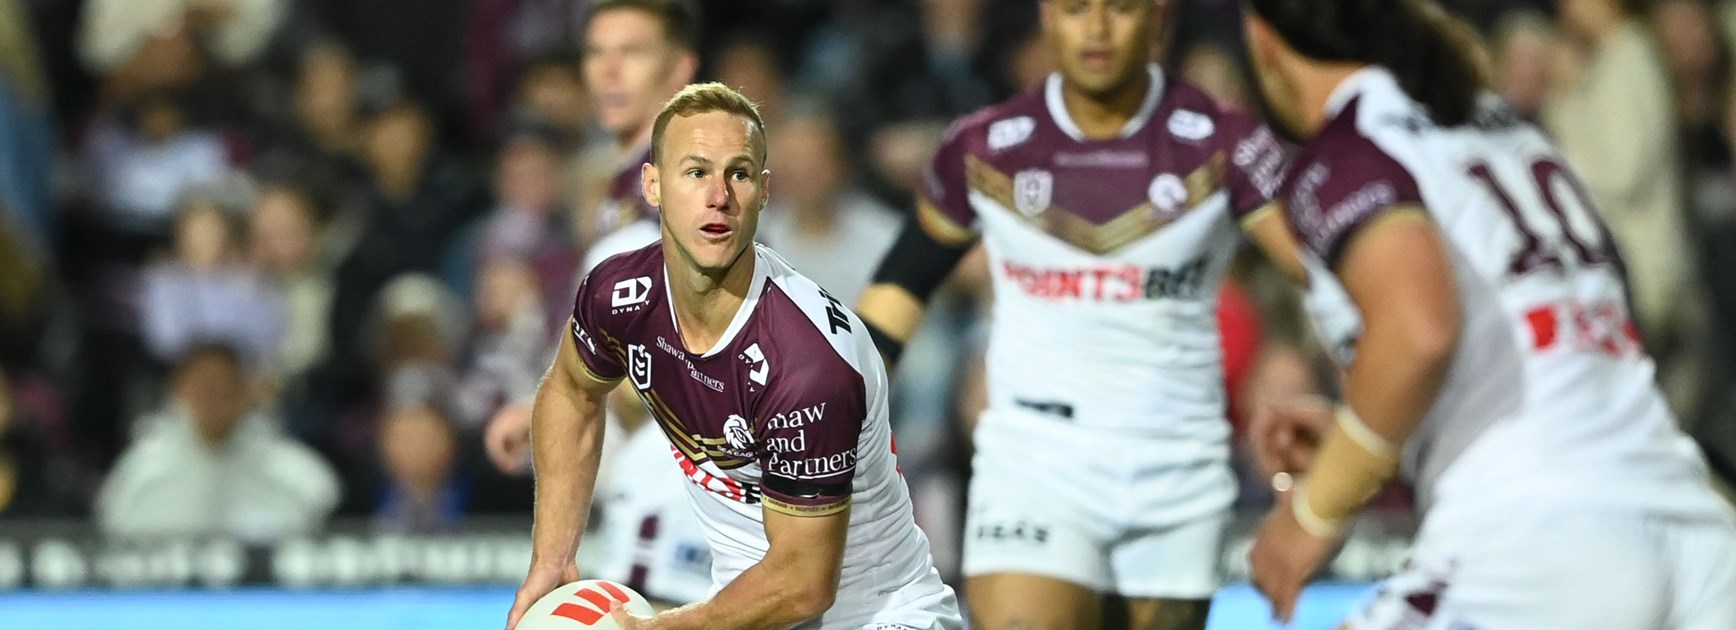 Judiciary news: Daly Cherry-Evans cleared